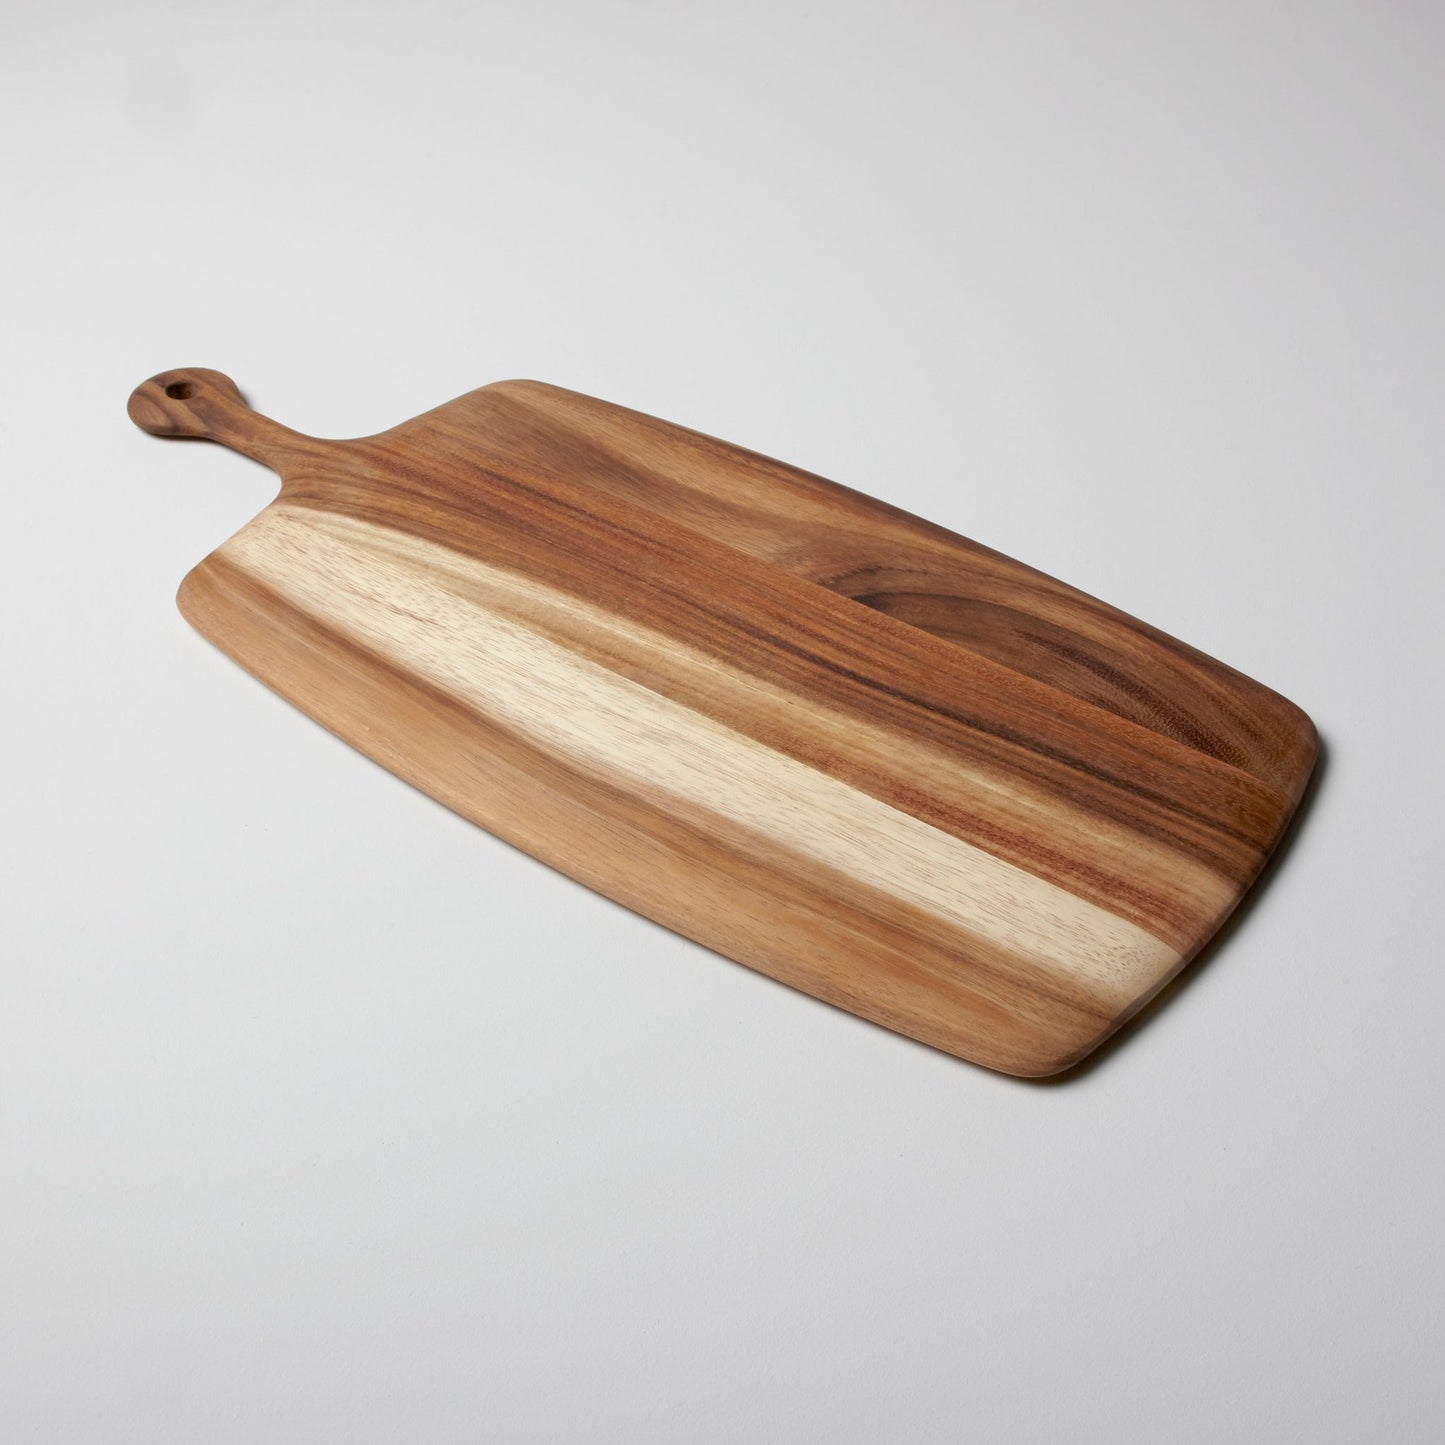 Acacia Rectangular Tapered Board with Rounded Handle